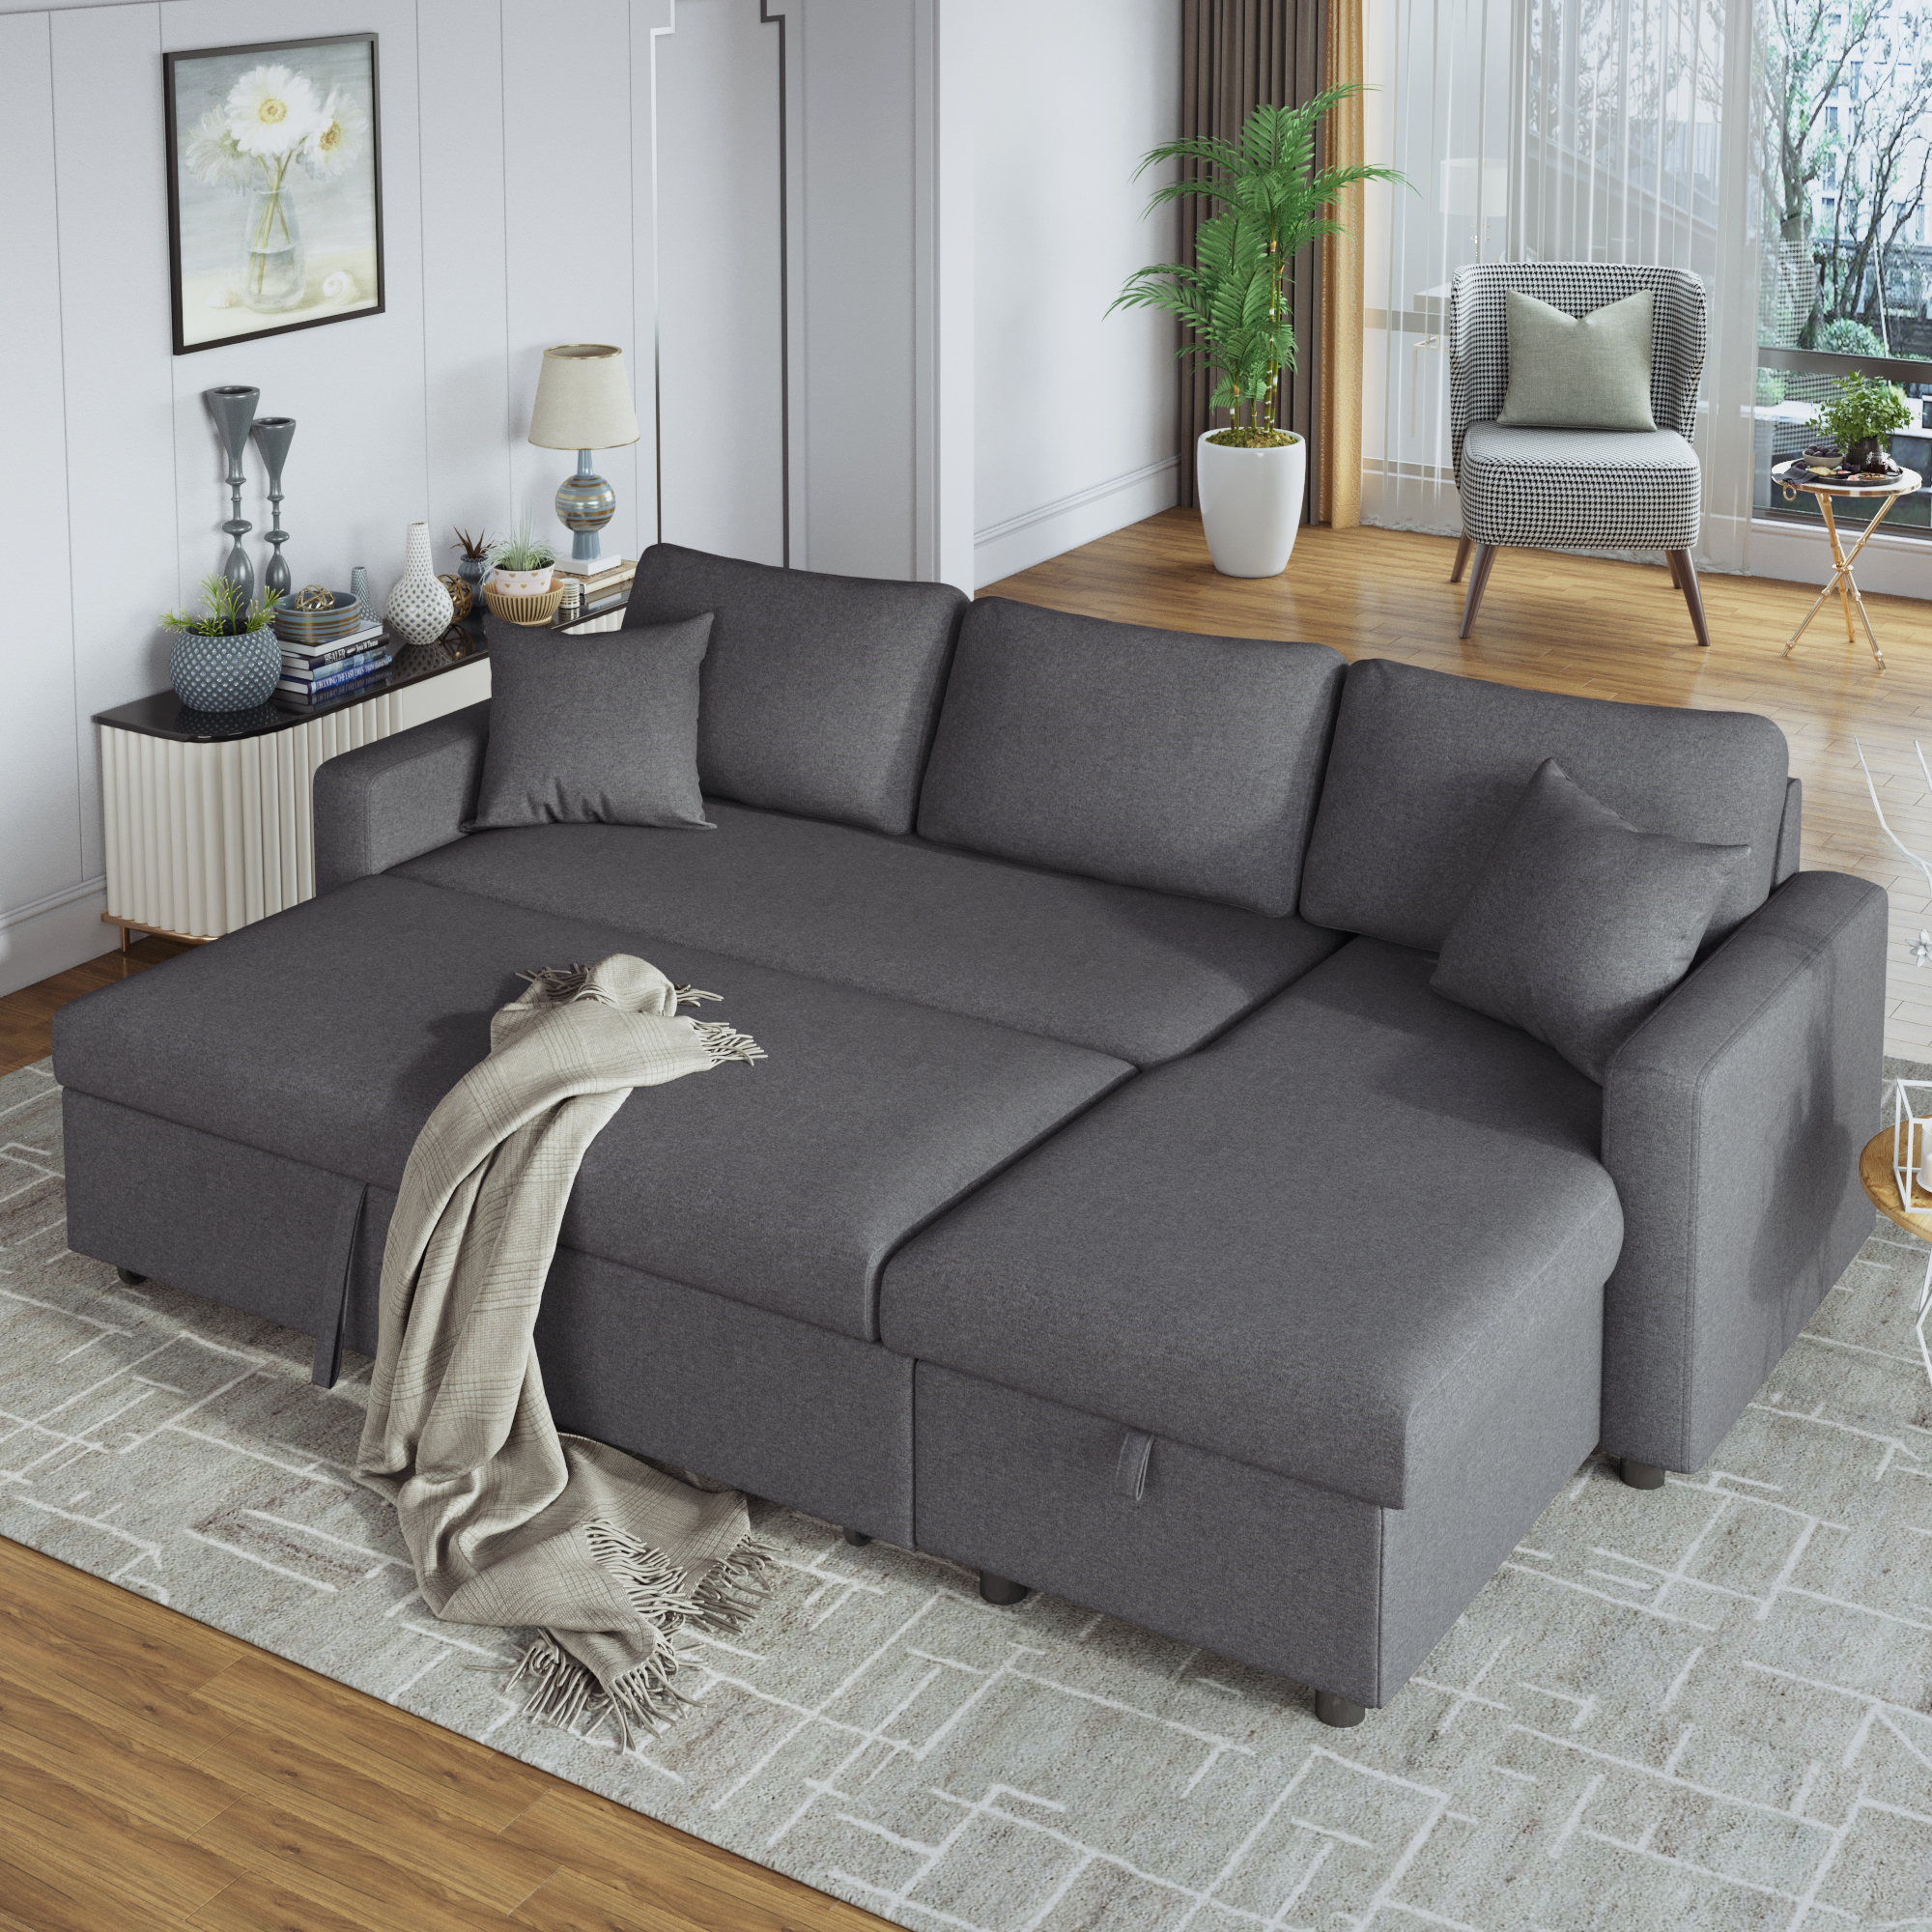 Upholstery Sleeper Sectional Sofa With Storage Space, 2 Tossing Cushions